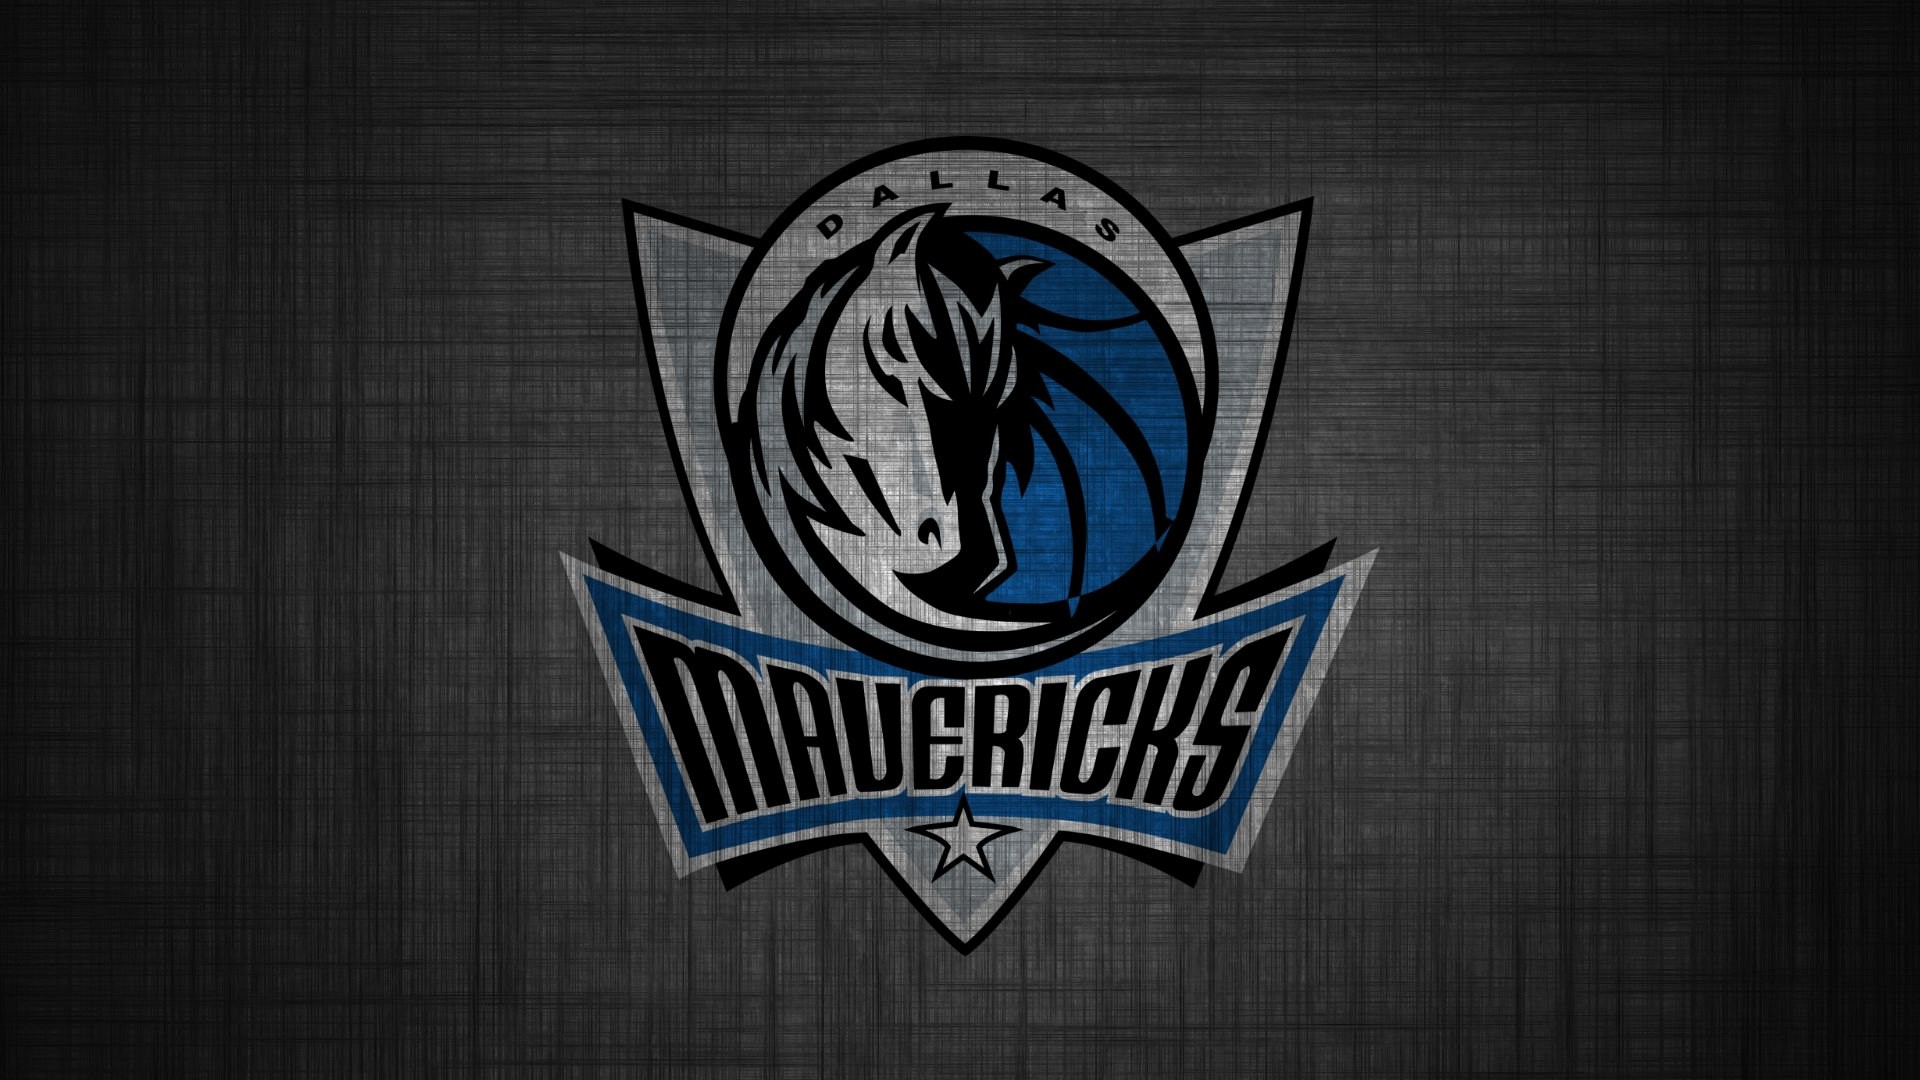 Wallpapers HD Dallas Mavericks With high-resolution 1920X1080 pixel. You can use this wallpaper for your Desktop Computer Backgrounds, Windows or Mac Screensavers, iPhone Lock screen, Tablet or Android and another Mobile Phone device